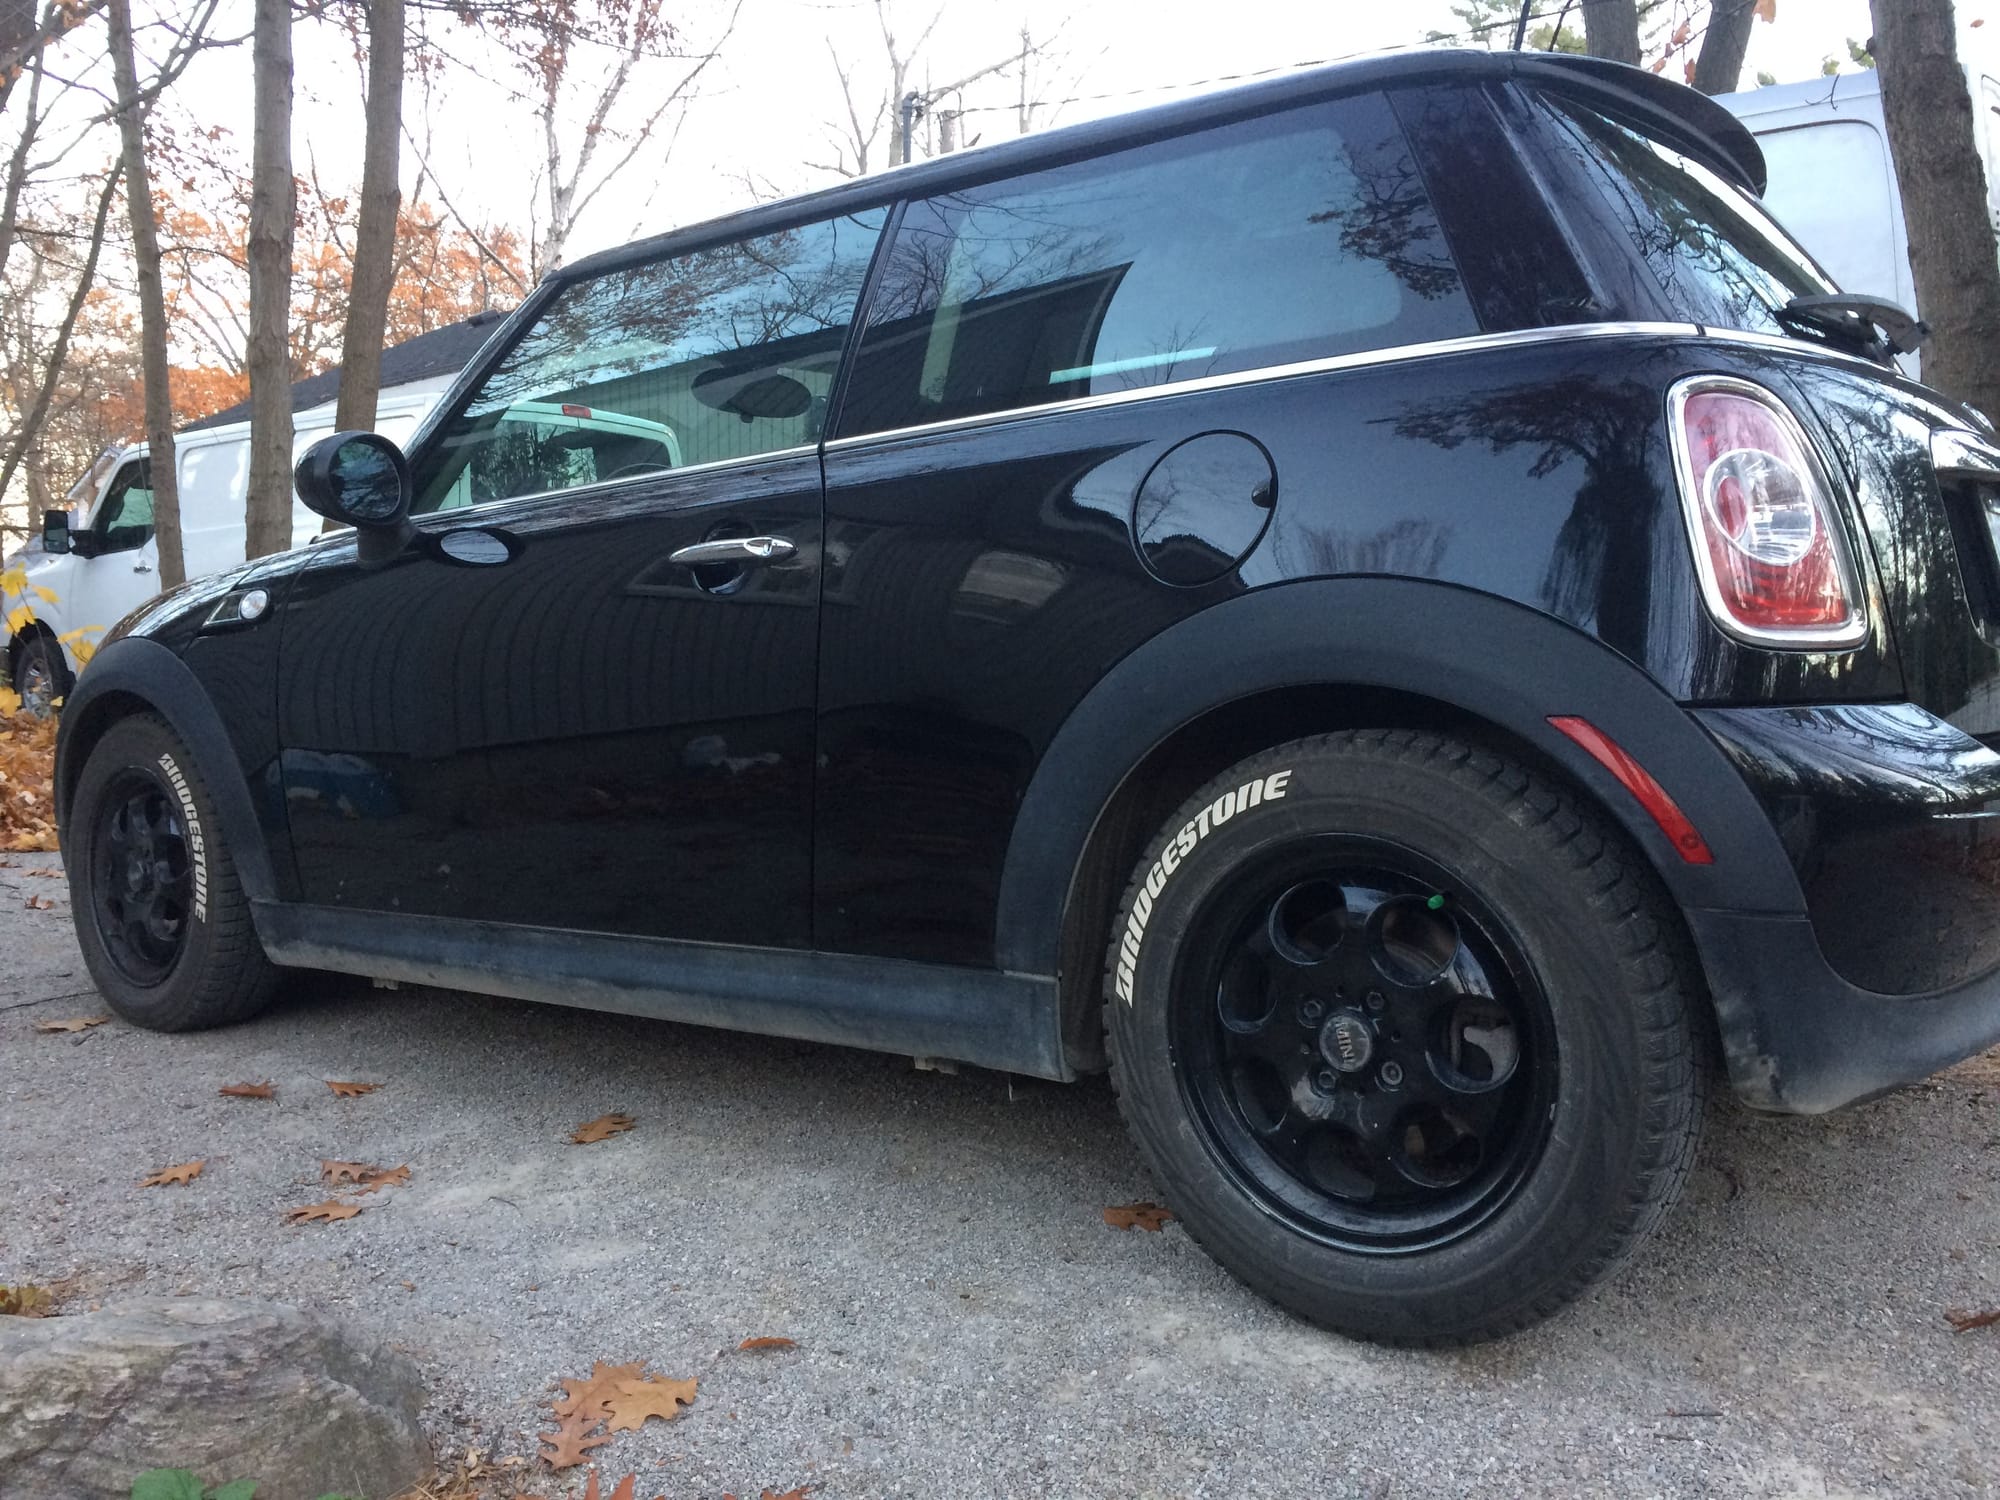 My White Tire Lettering - North American Motoring